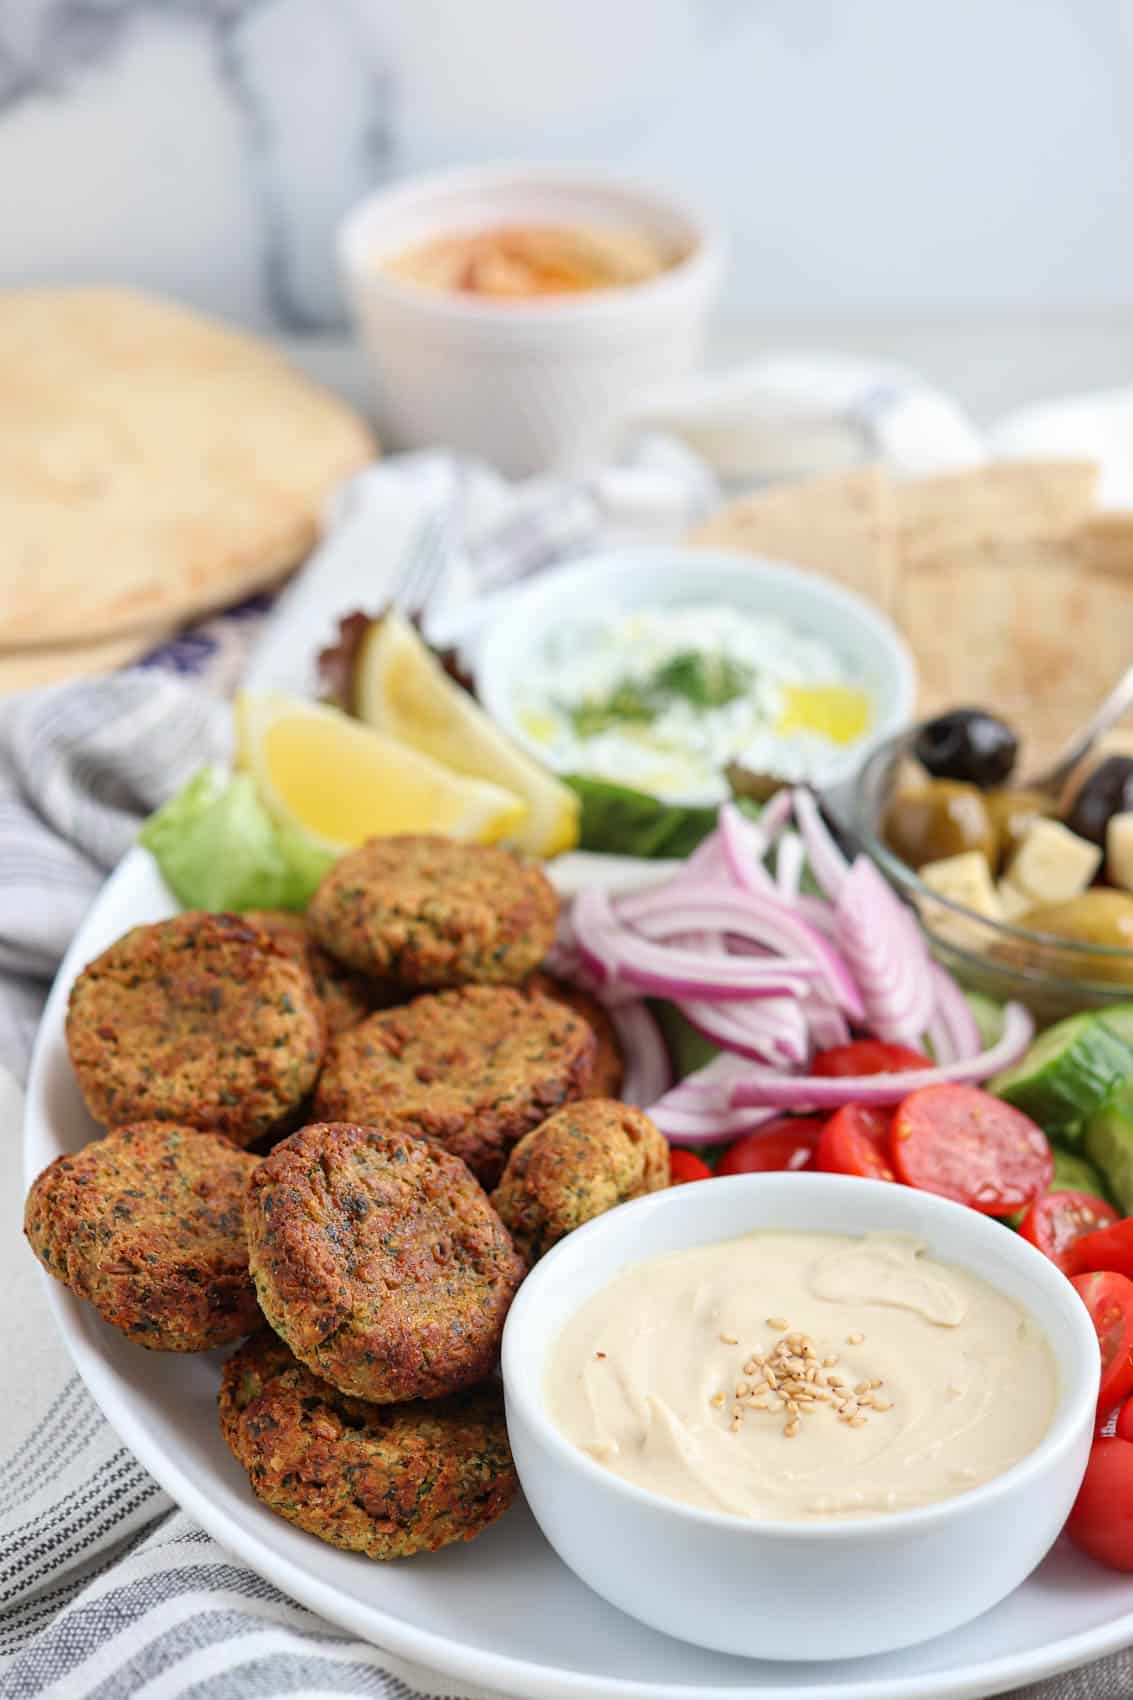 oval falafel platter with falafel patties, pita triangles, fresh veggies, two dips, greens and olives.